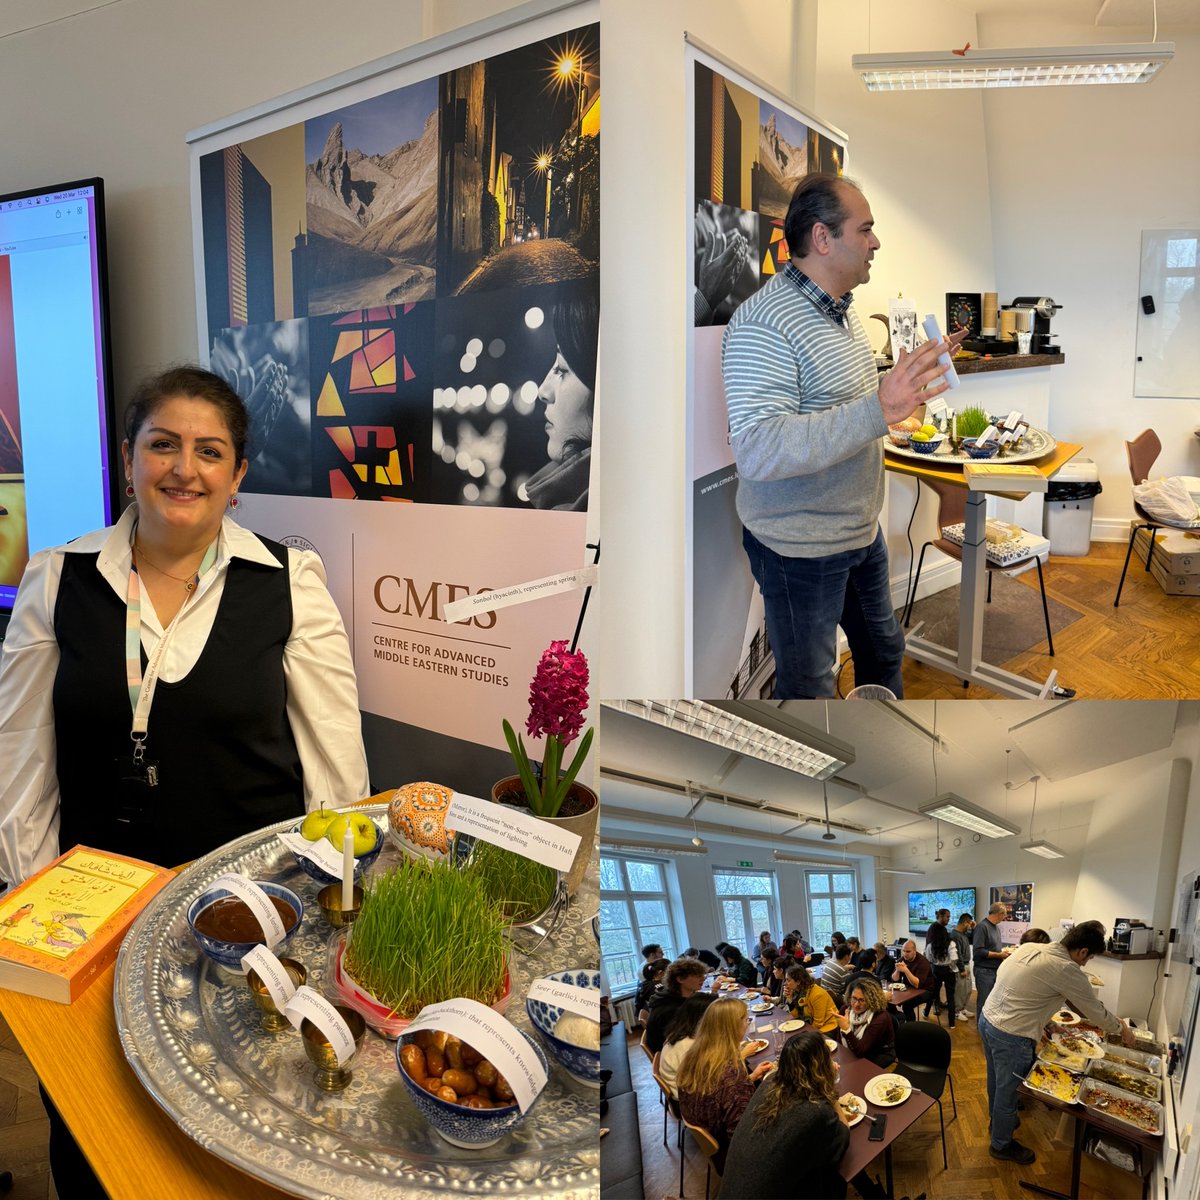 Nowruz celebrations with lovely Persian food at CMES today with staff and students! @lunduniversity